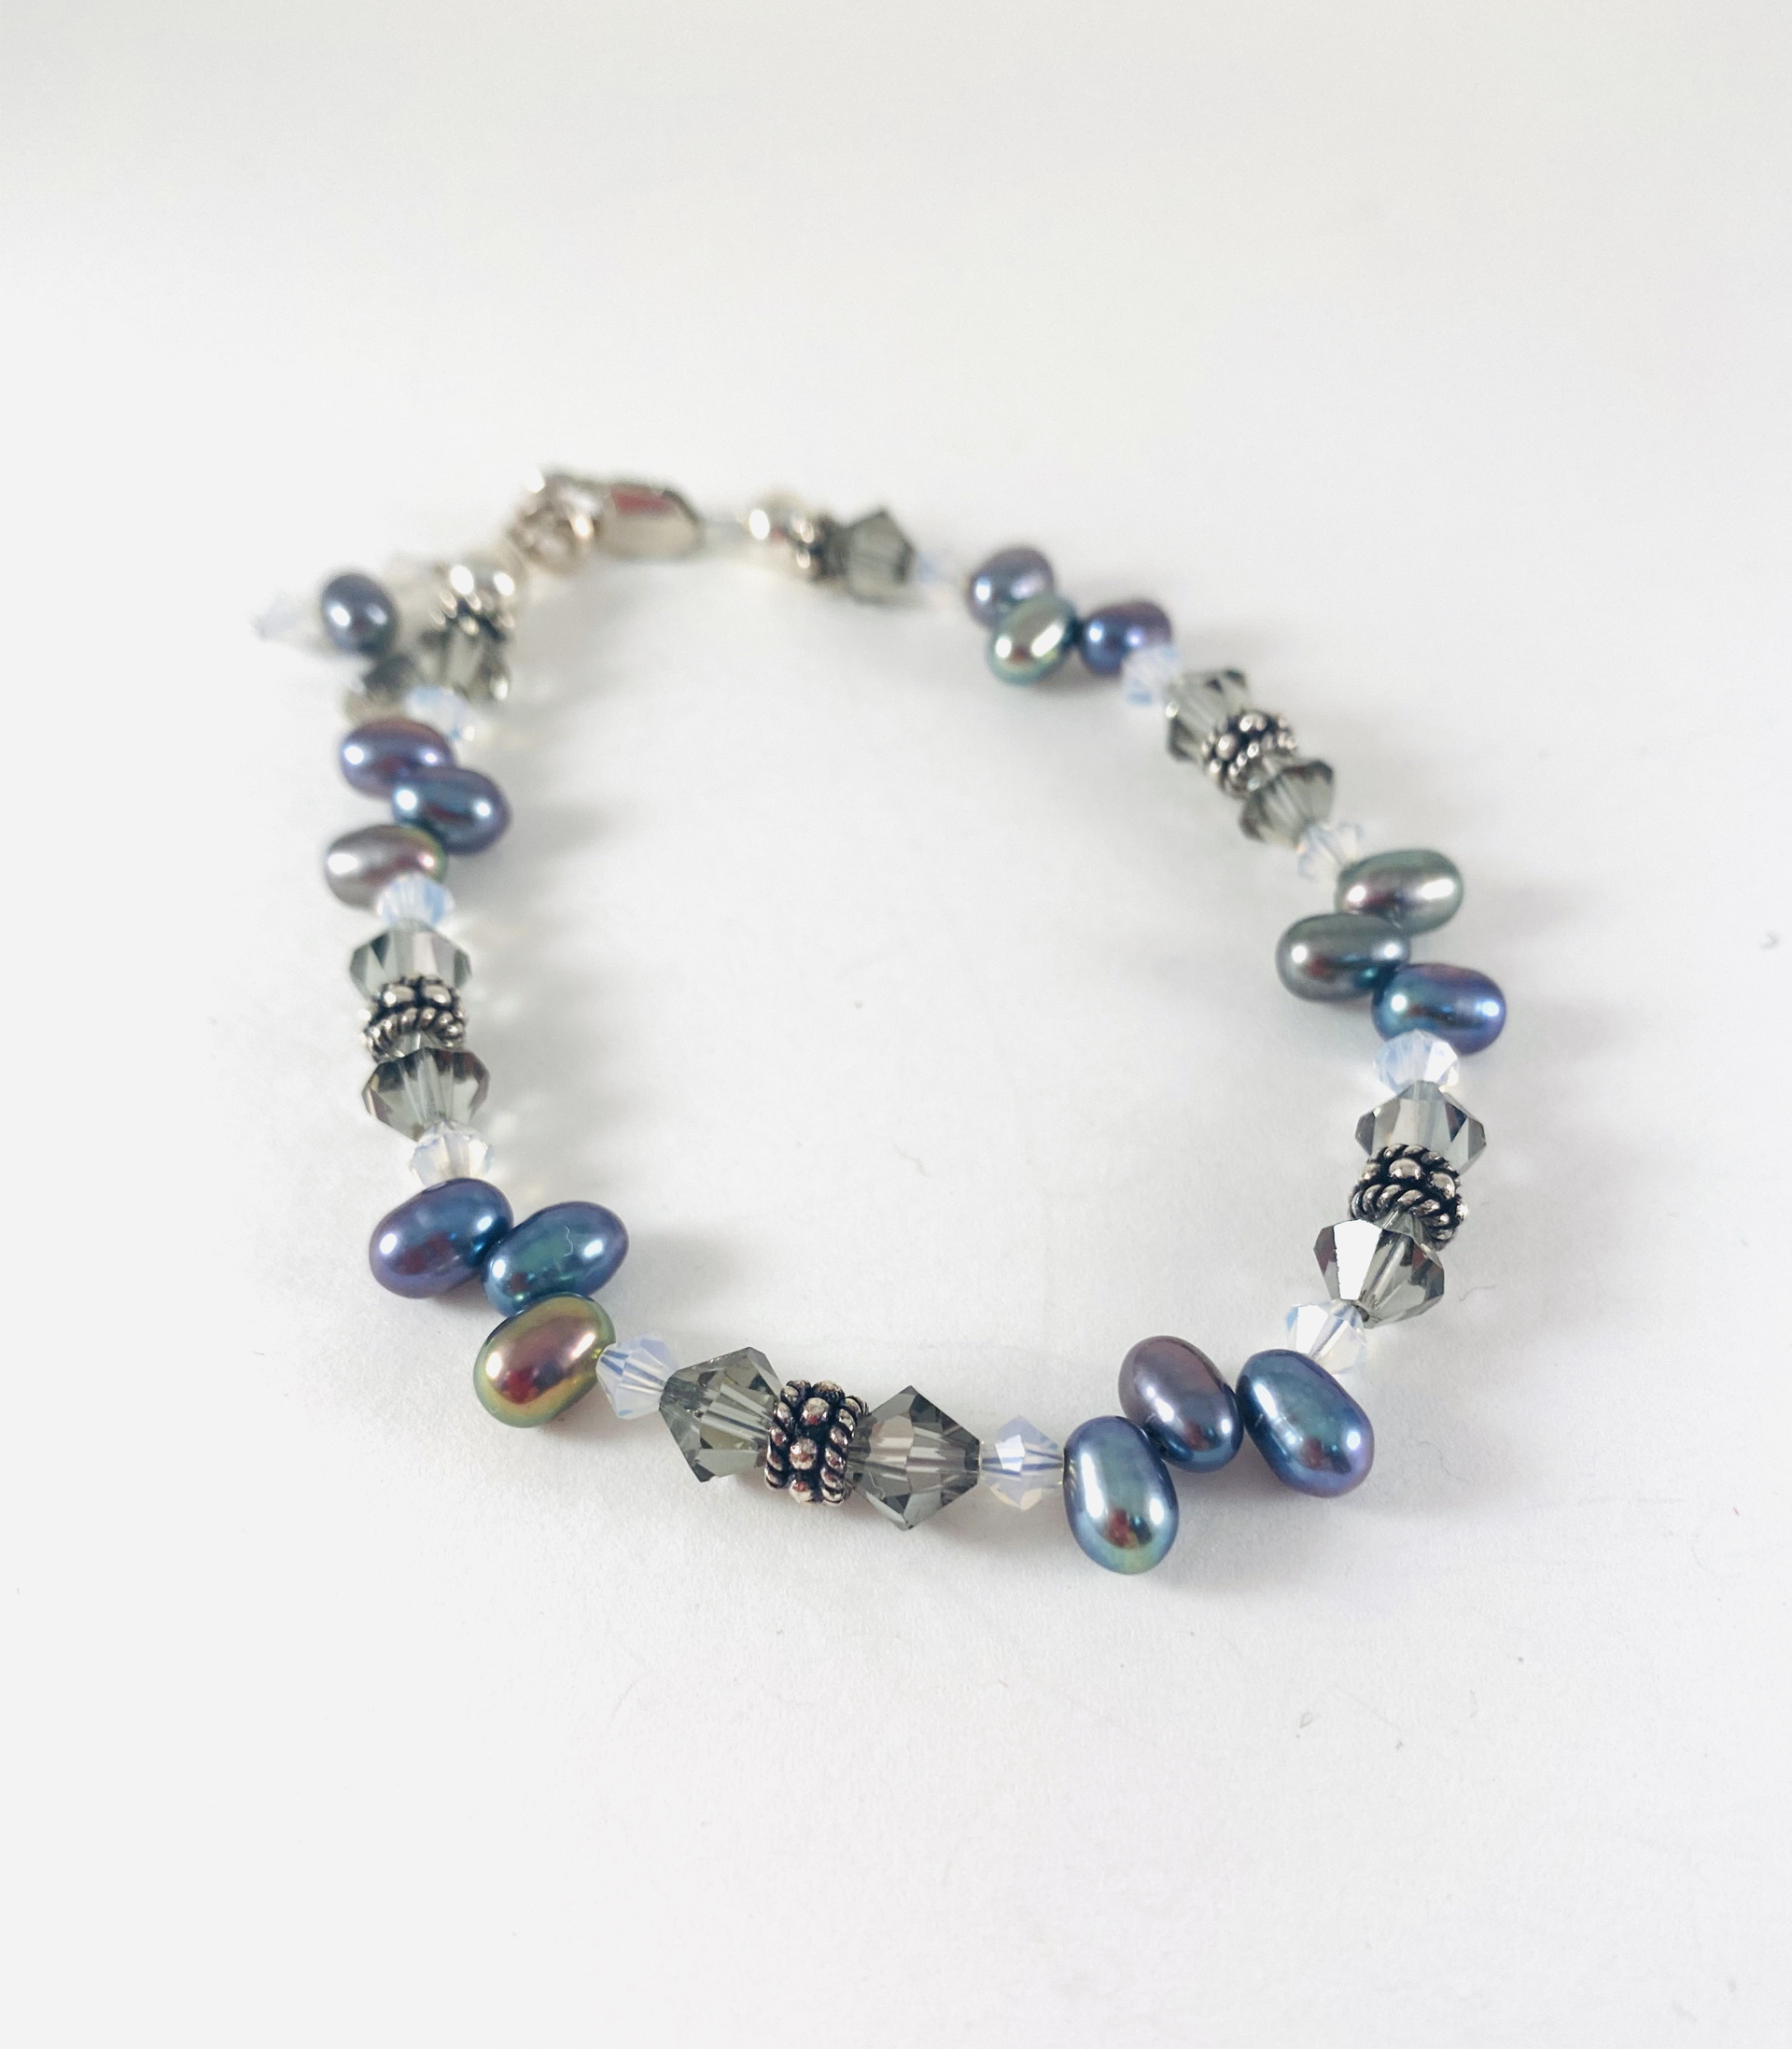 Silver, Crystal and Pearl Bracelet #53 by Shoshannah Weinisch